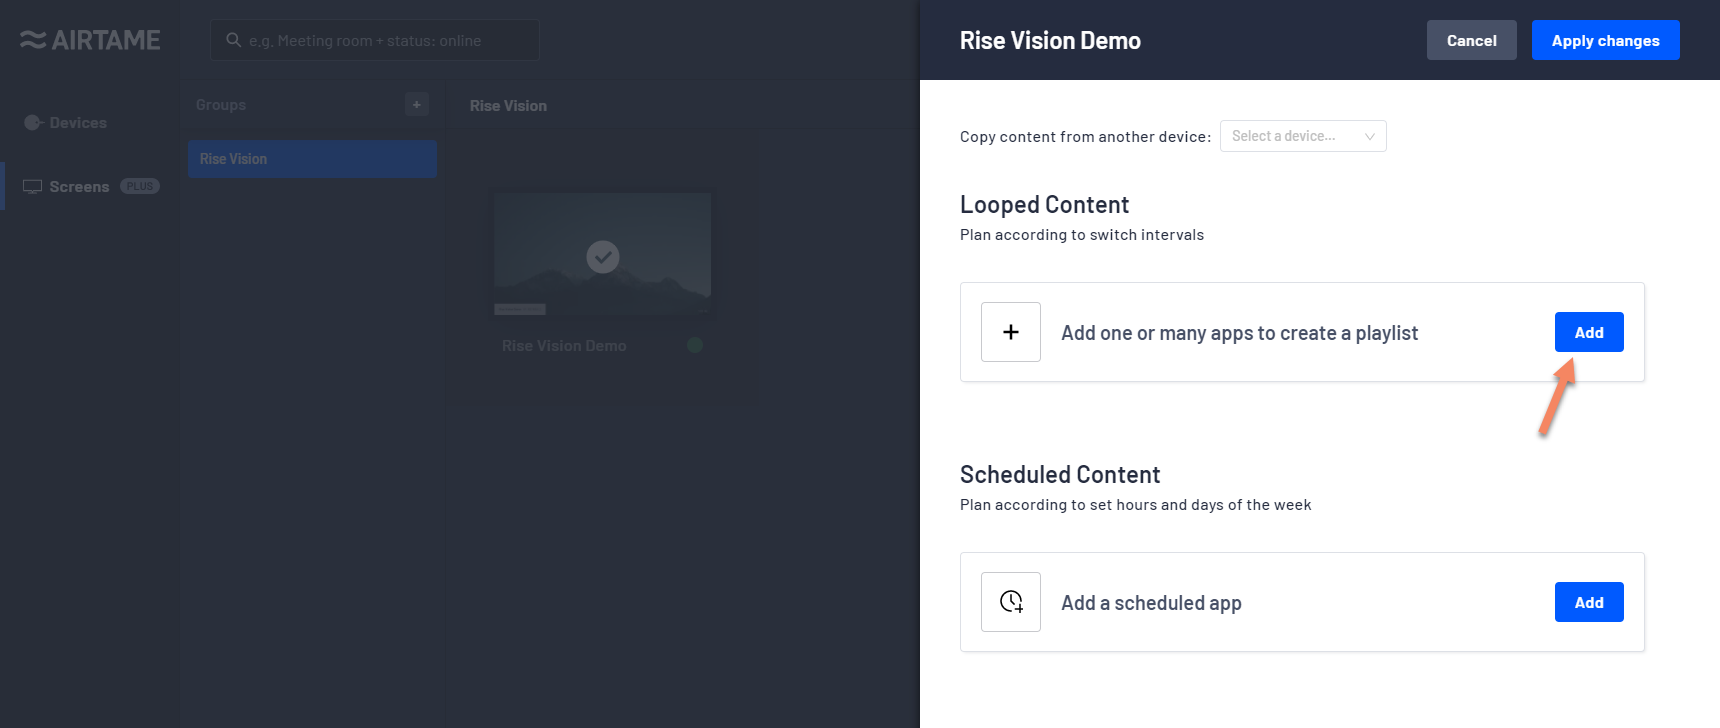 airtame-rise-vision-content-settings4.png